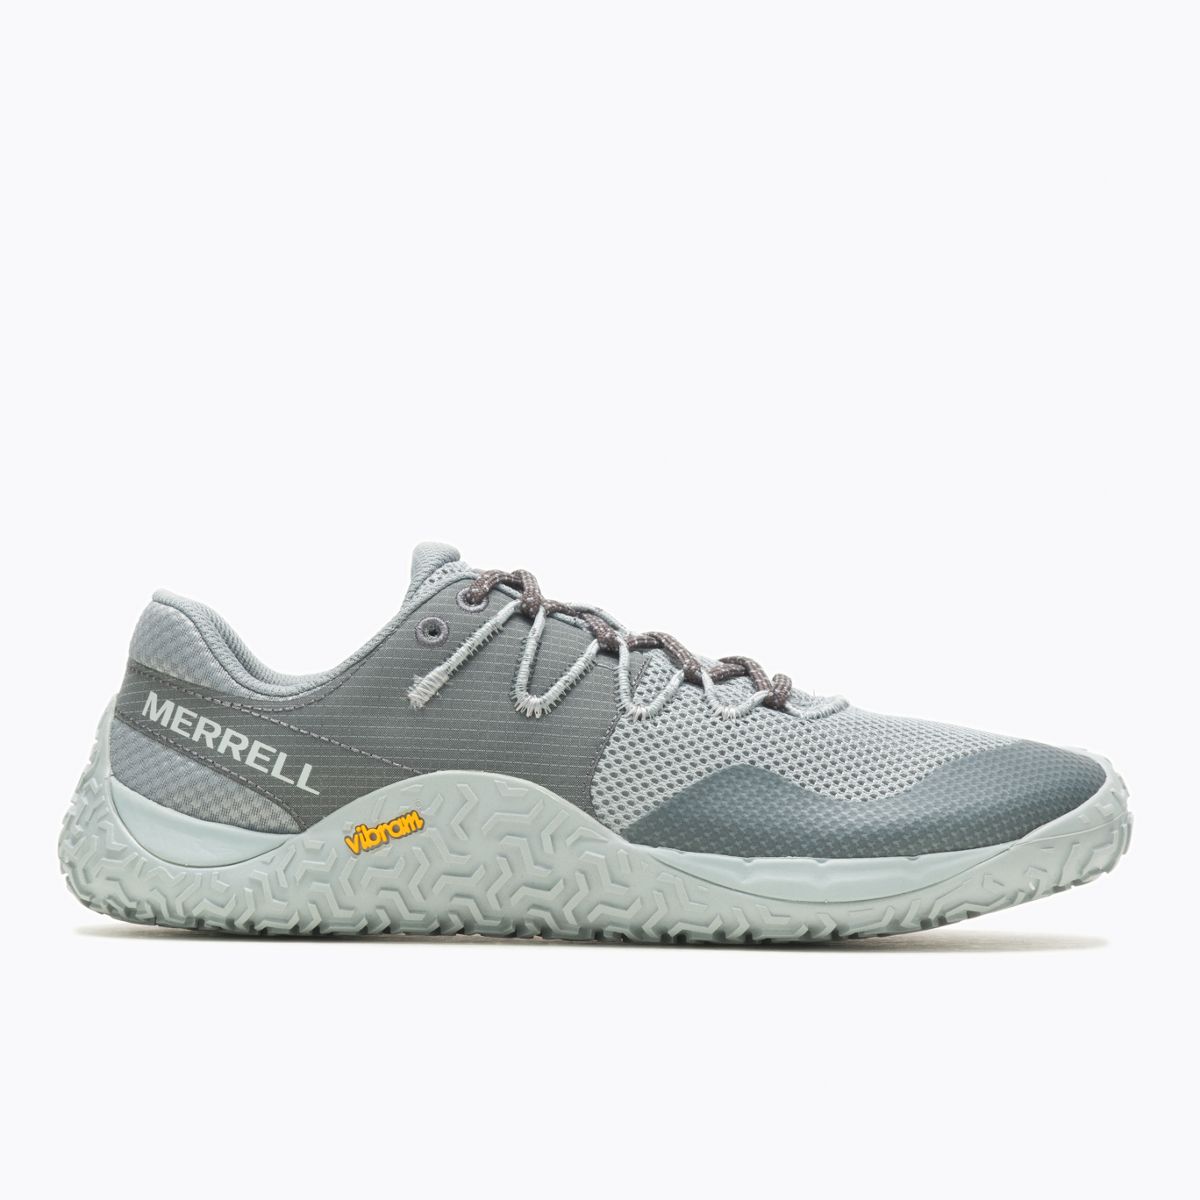 Shop Trail Glove 7 Barefoot Shoes | Natural Feel Merrell